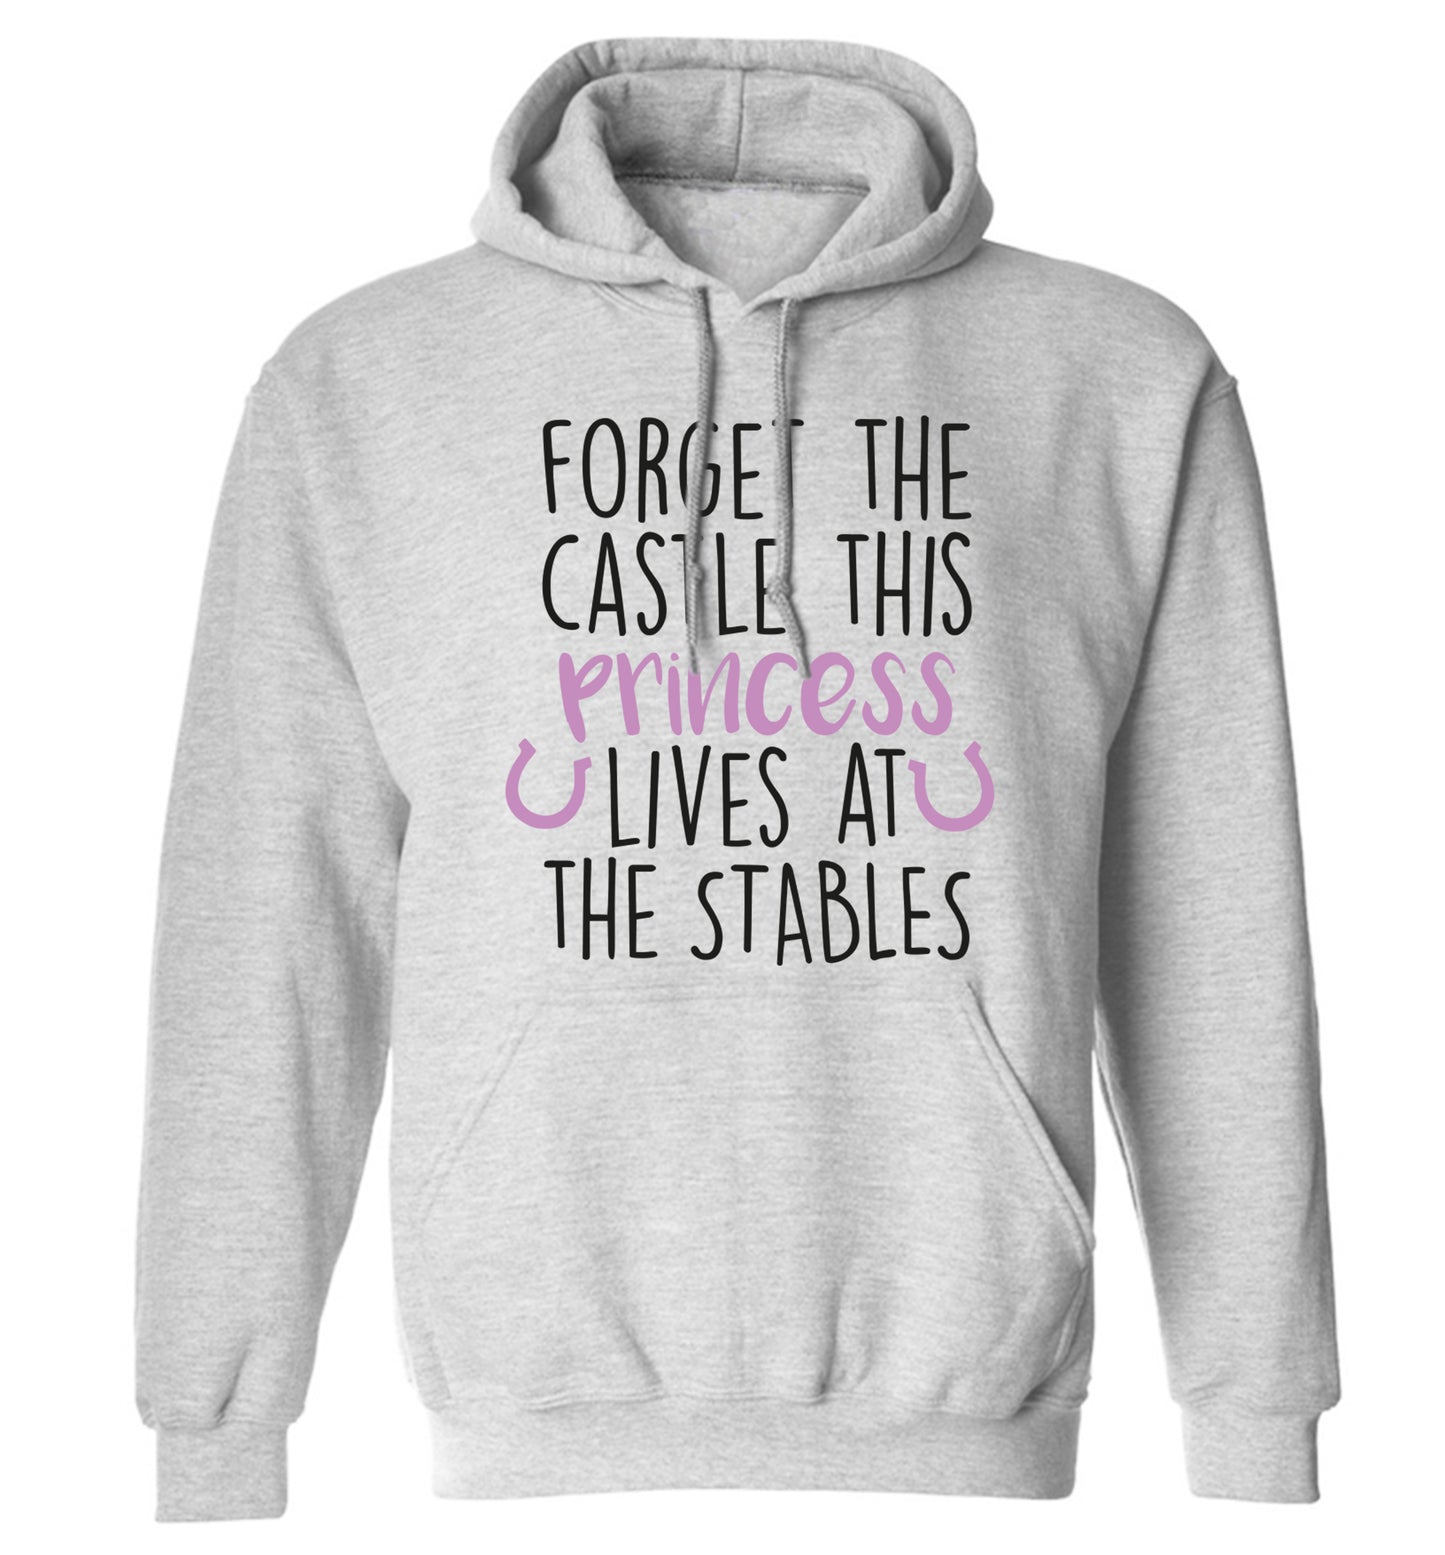 Forget the castle this princess lives at the stables adults unisex grey hoodie 2XL